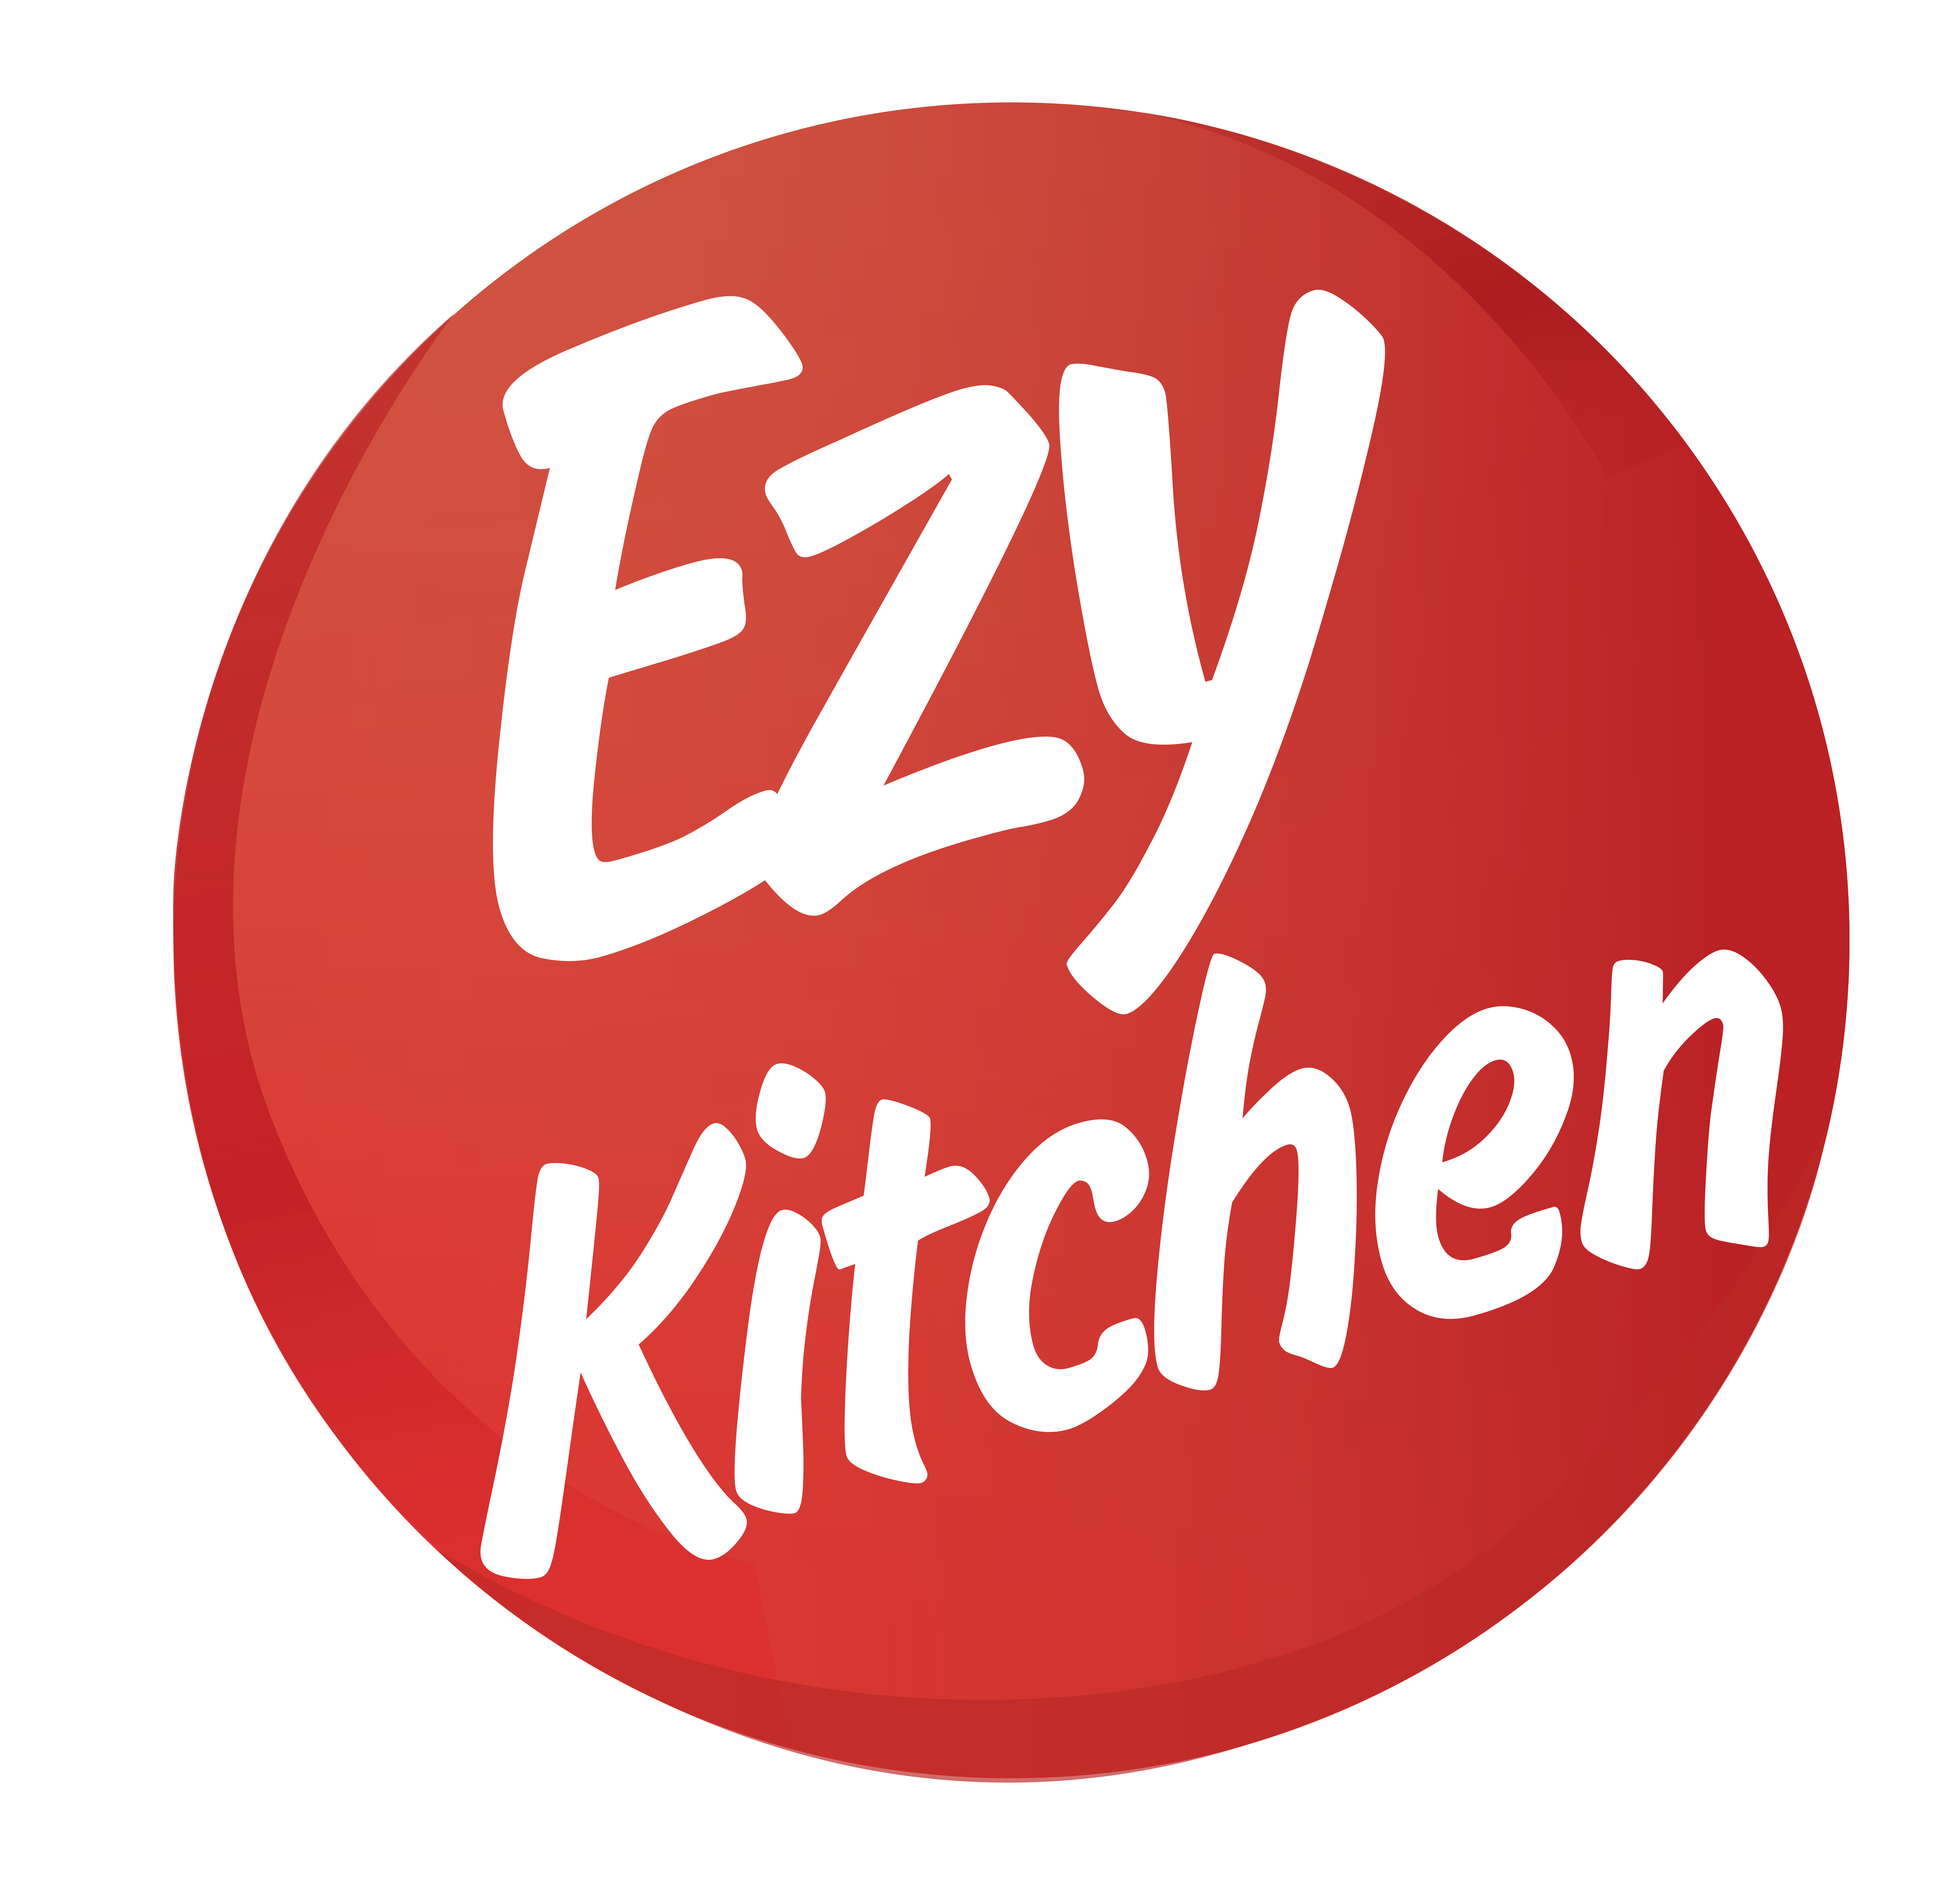 EzyKitchen helps kitchen teams manage recipes, costings, shopping and cooking plans.